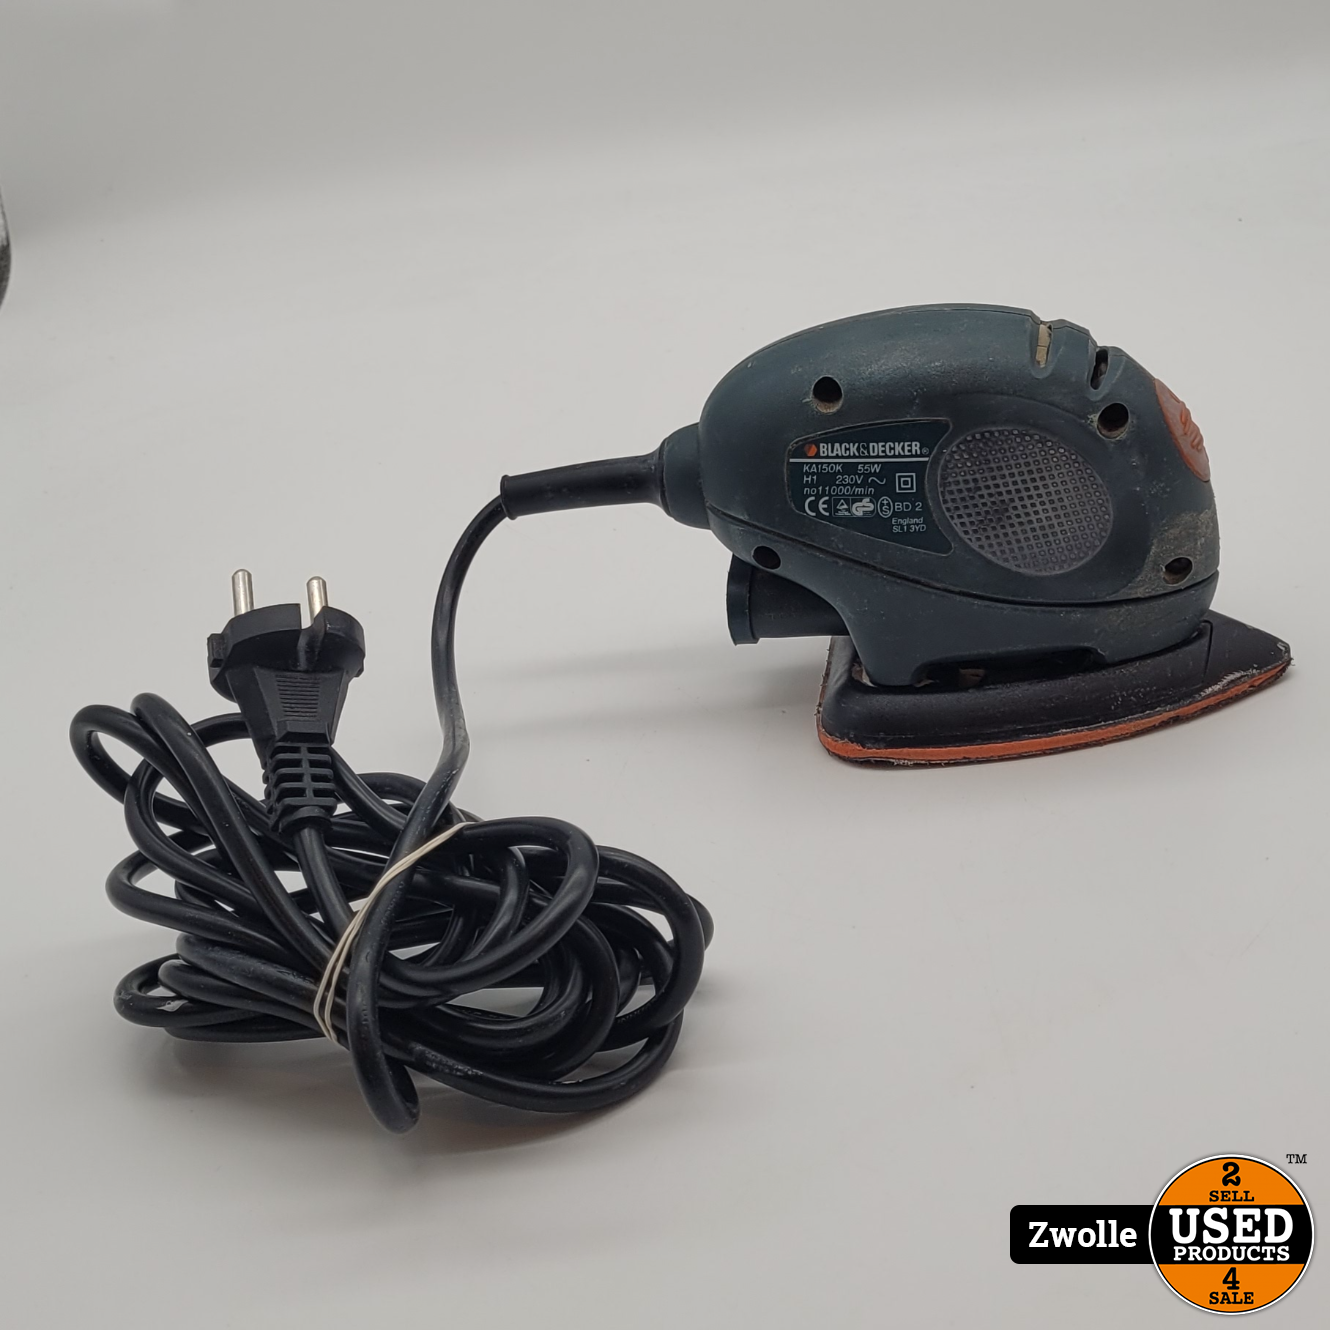 Anders stam Komkommer Black &amp; Decker Mouse schuurmachine KA150K - Used Products Zwolle